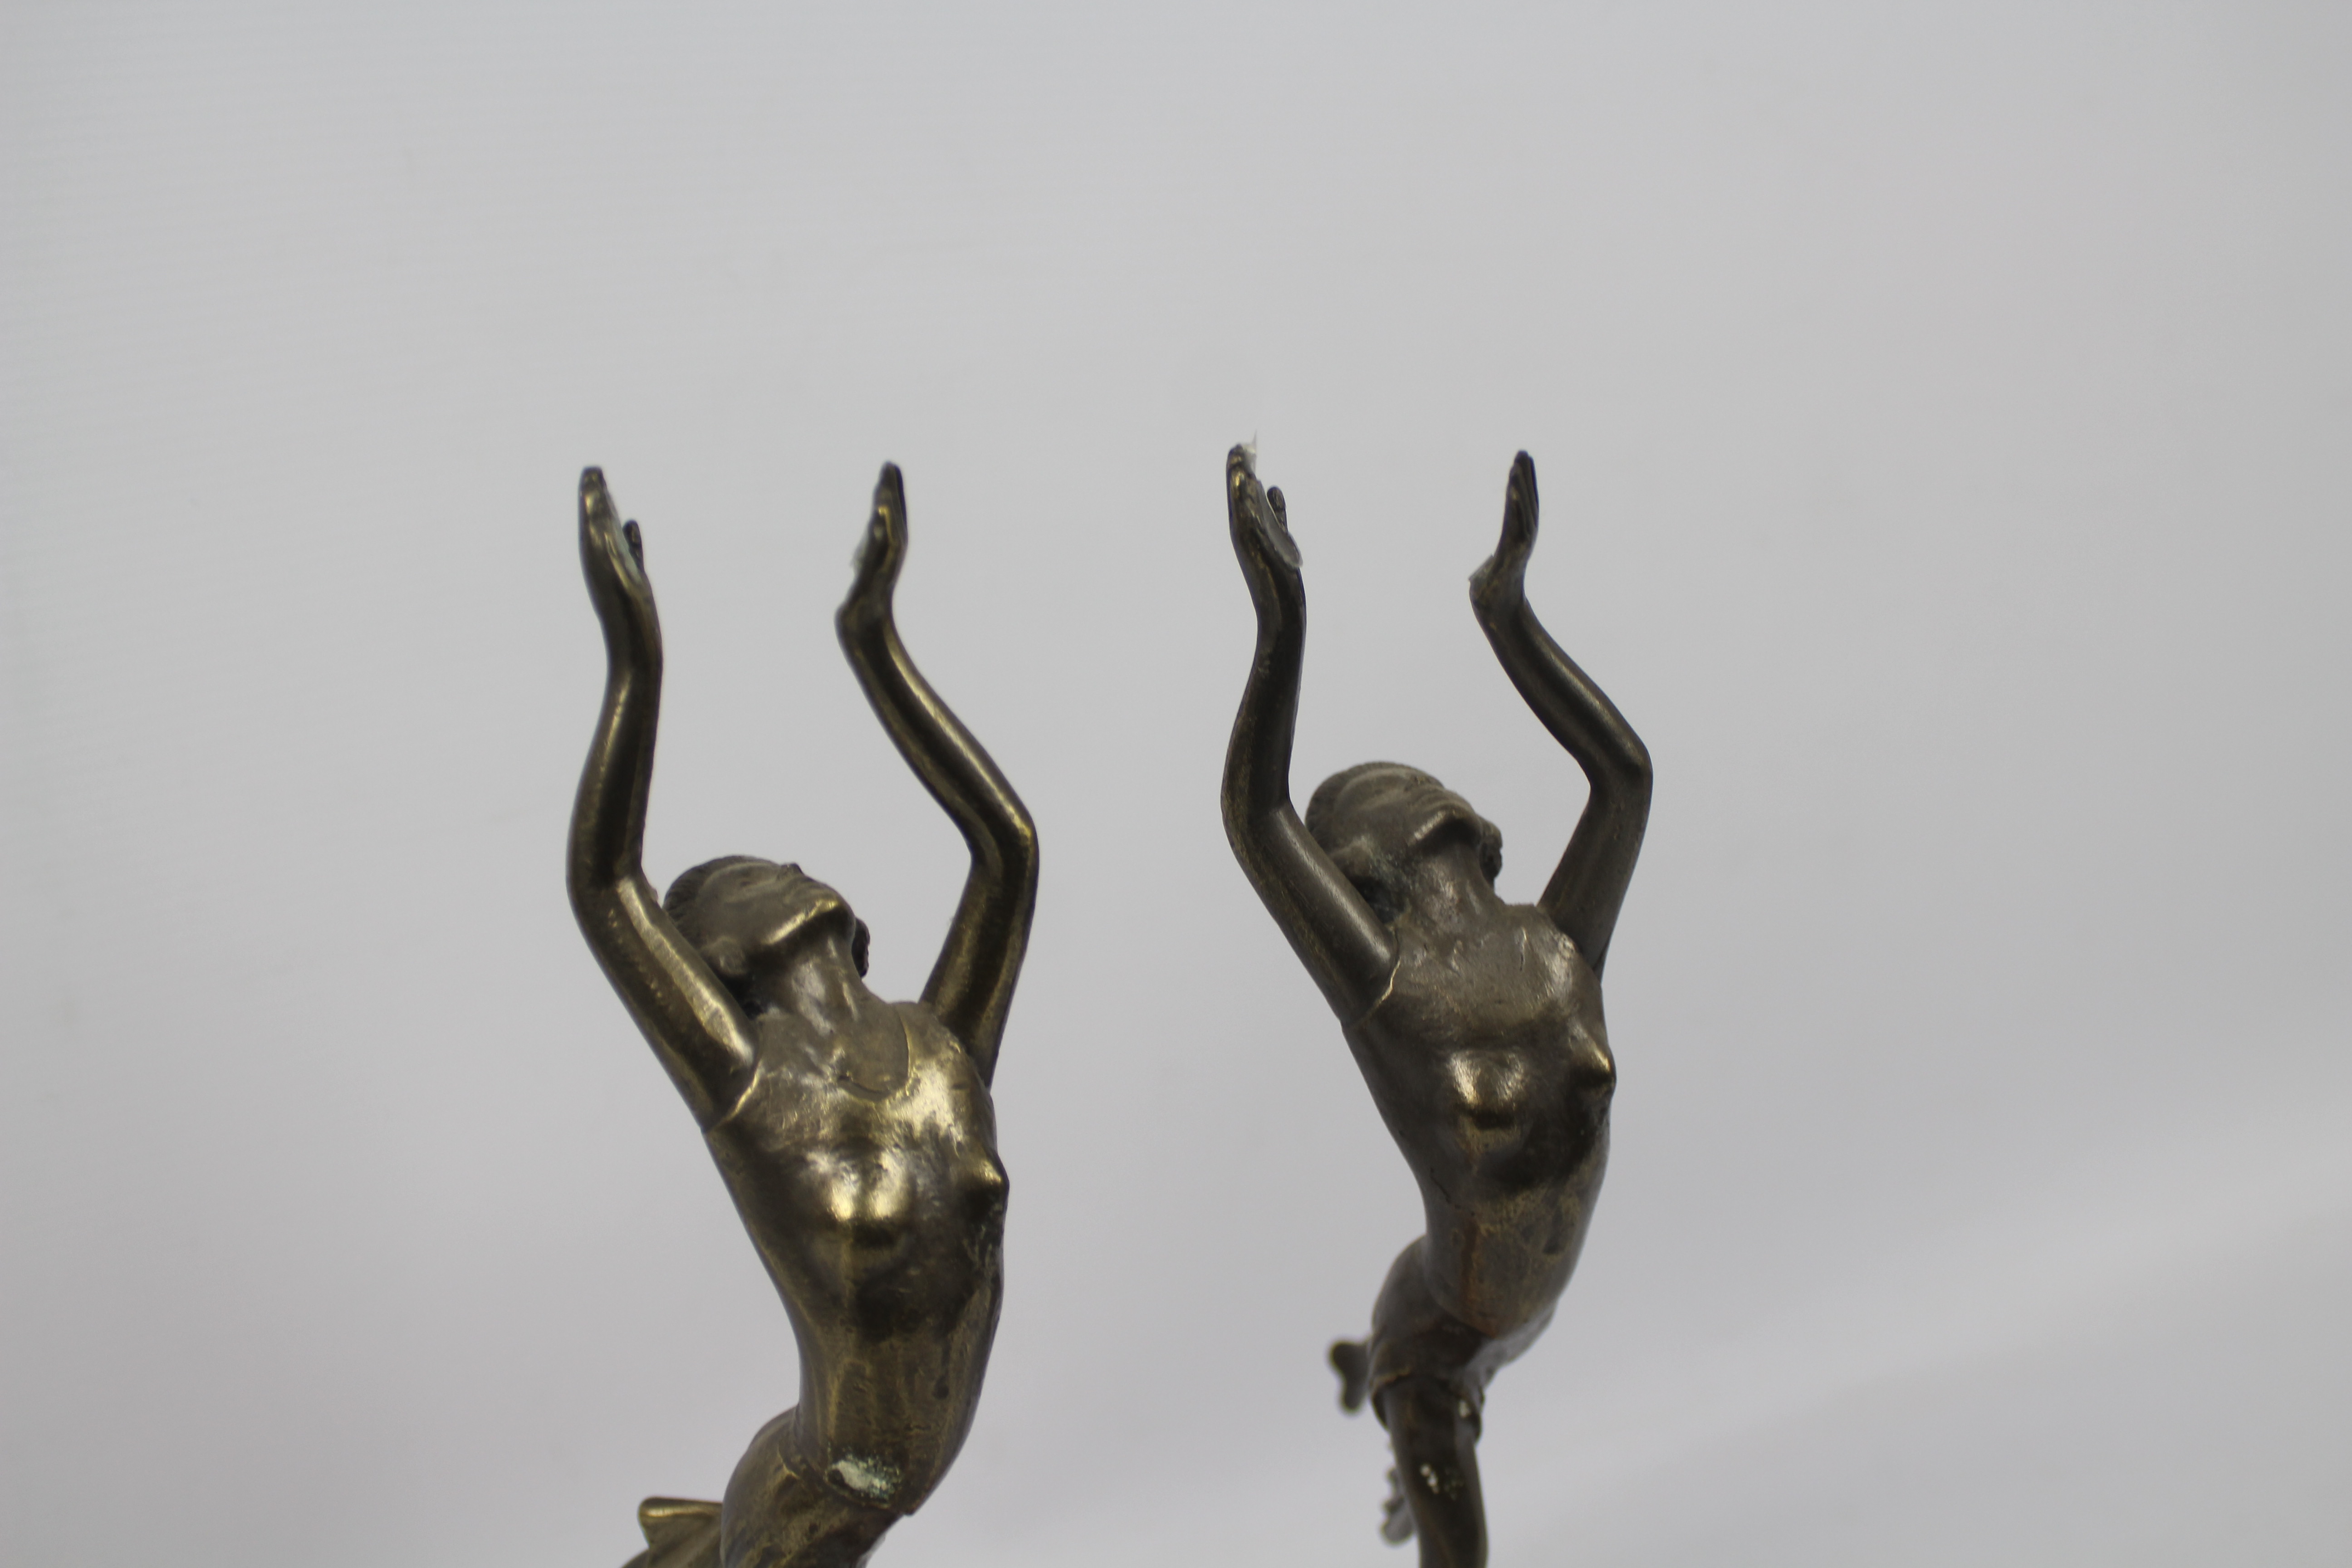 A pair of Art Deco style sculptures modelled as female figures holding aloft spheres, - Image 6 of 6